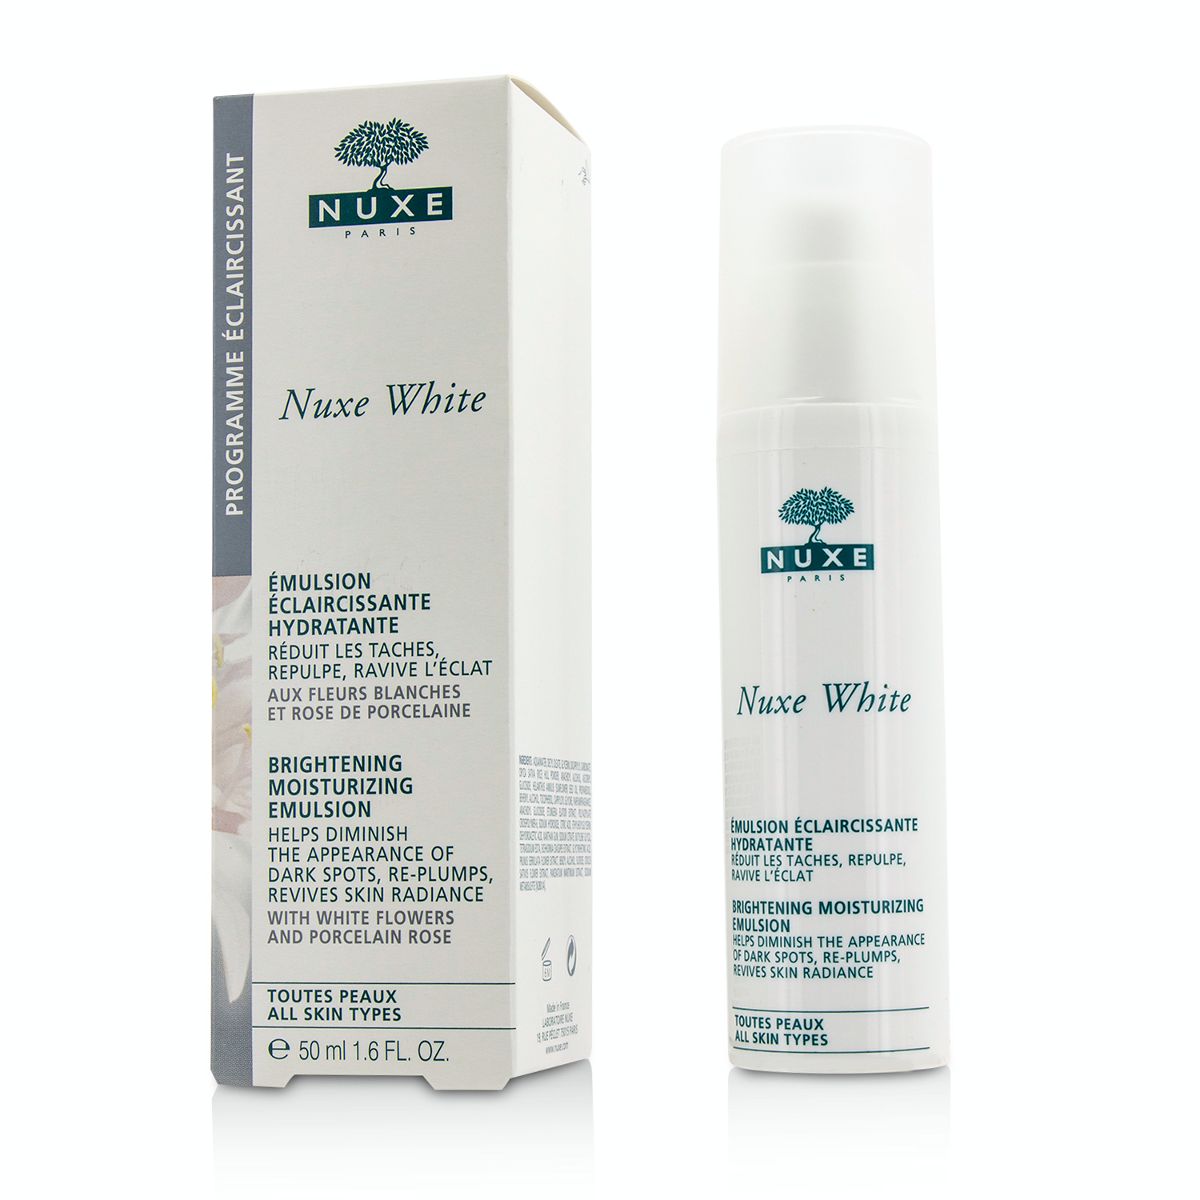 Nuxe White Brightening Moisturizing Emulsion Nuxe Image